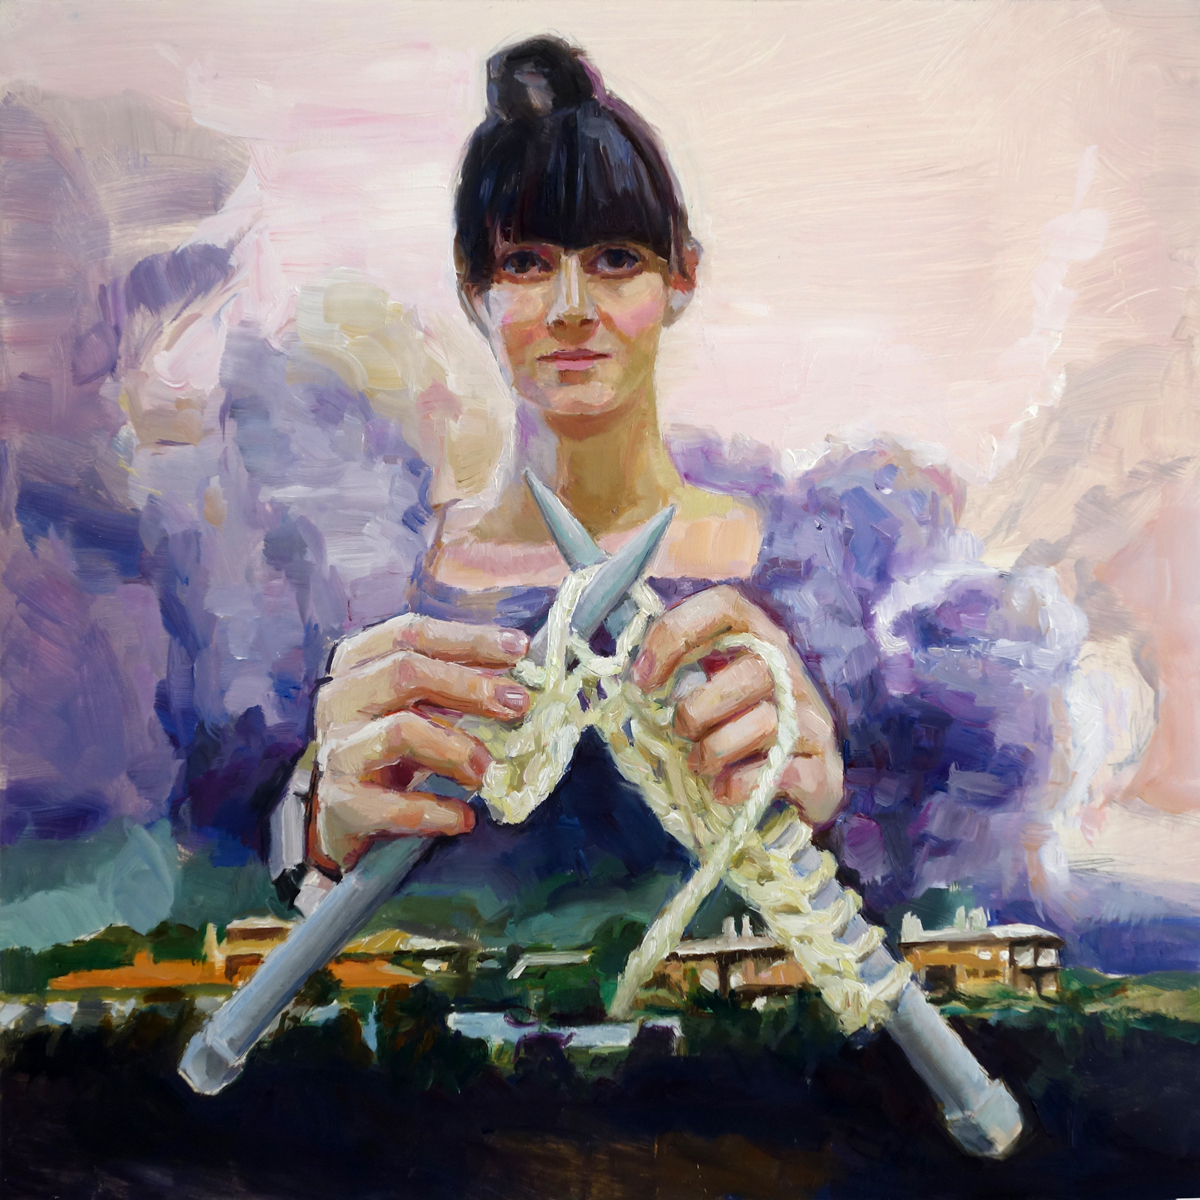 'Victory Knitter' 40x40 cm, oil on wood panel